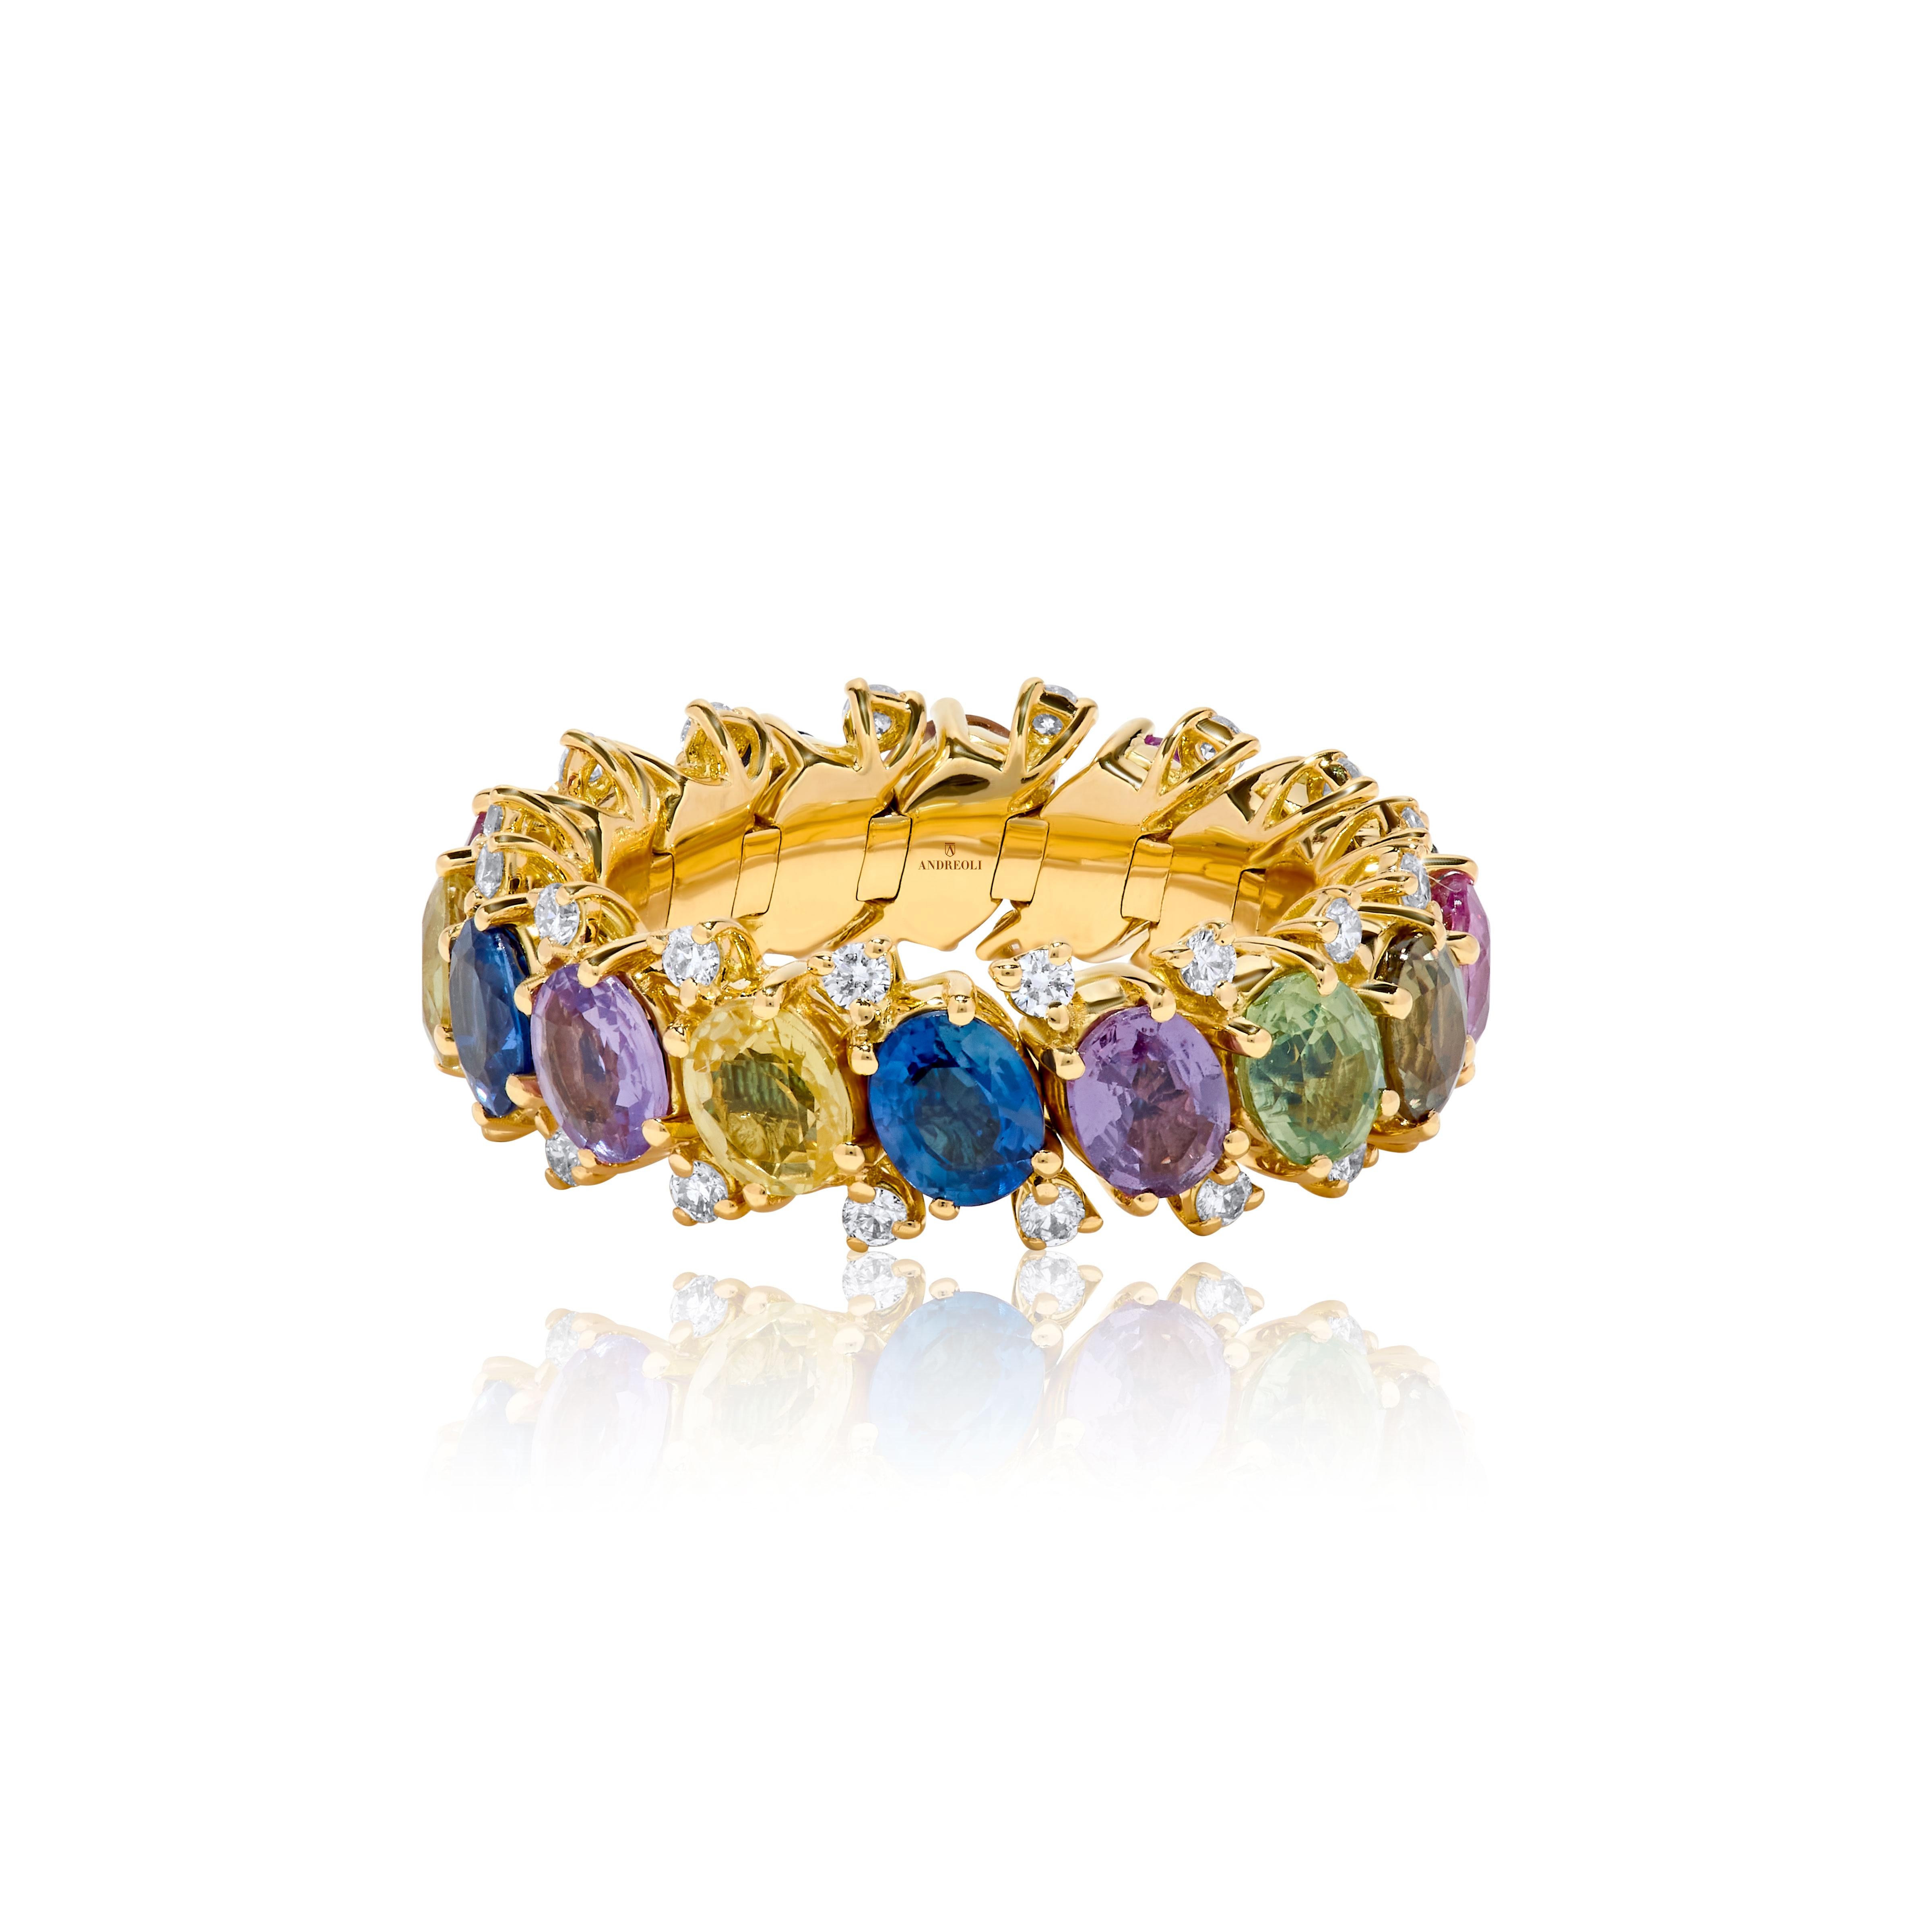 Andreoli Diamond Mixed Sapphire 18 Karat Yellow Gold Stretchy Ring

This ring features:
- 0.54 Carat Diamond
- 7.21 Carat Mixed Sapphire
- 7.70 Gram 18K Yellow Gold
- Stretchy Band
- Made In Italy